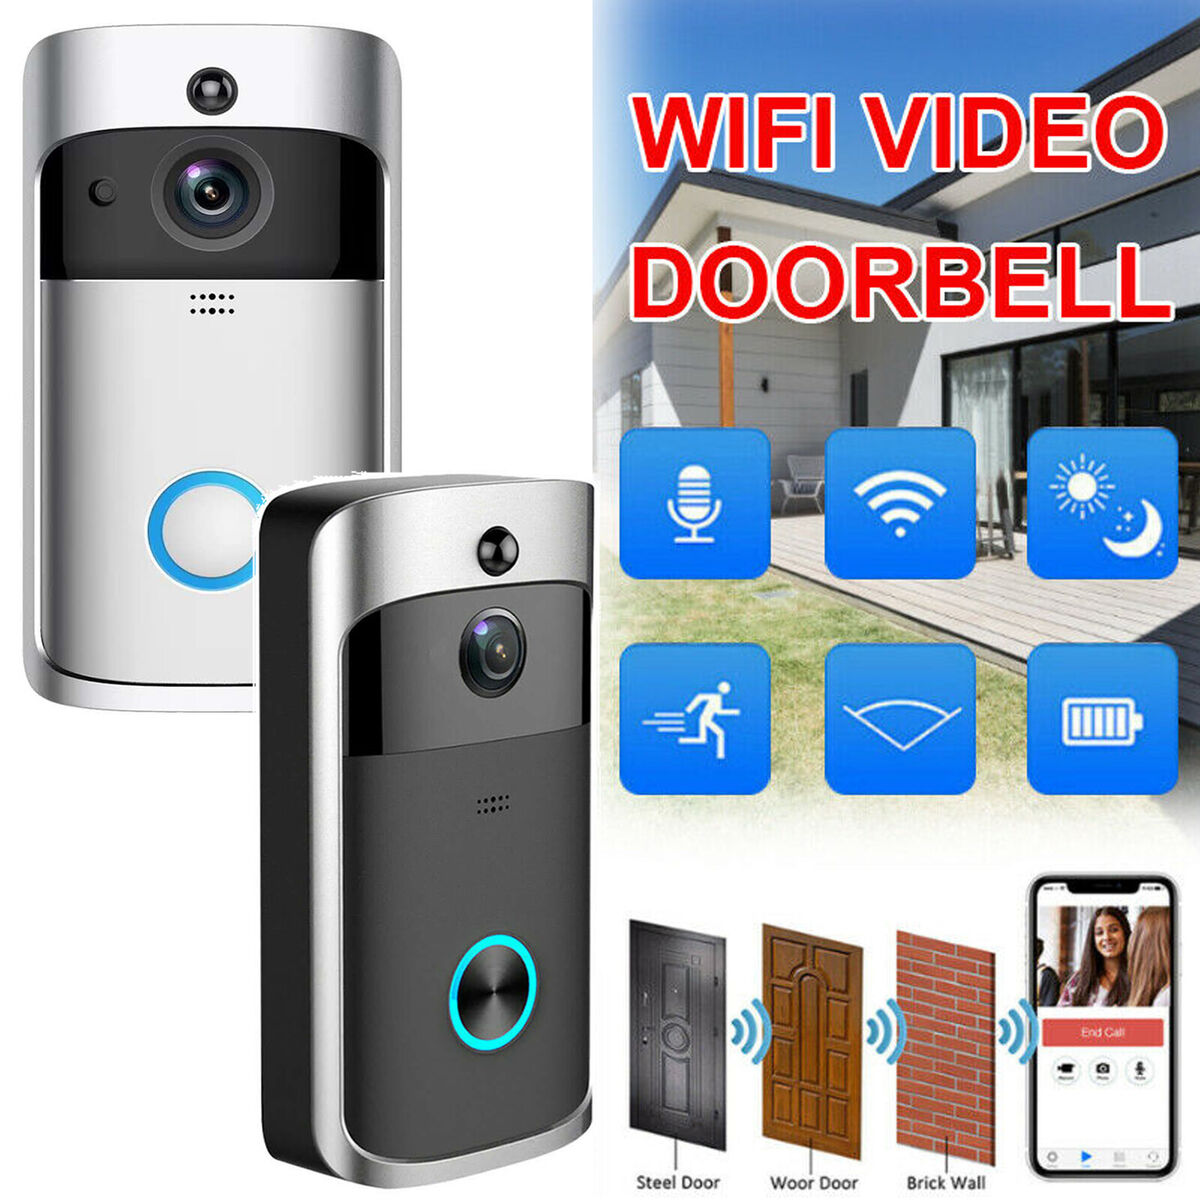 Smart Ring & Video Doorbell with Camera Wireless WiFi Security Phone Bell  720PHD Silver - Walmart.com